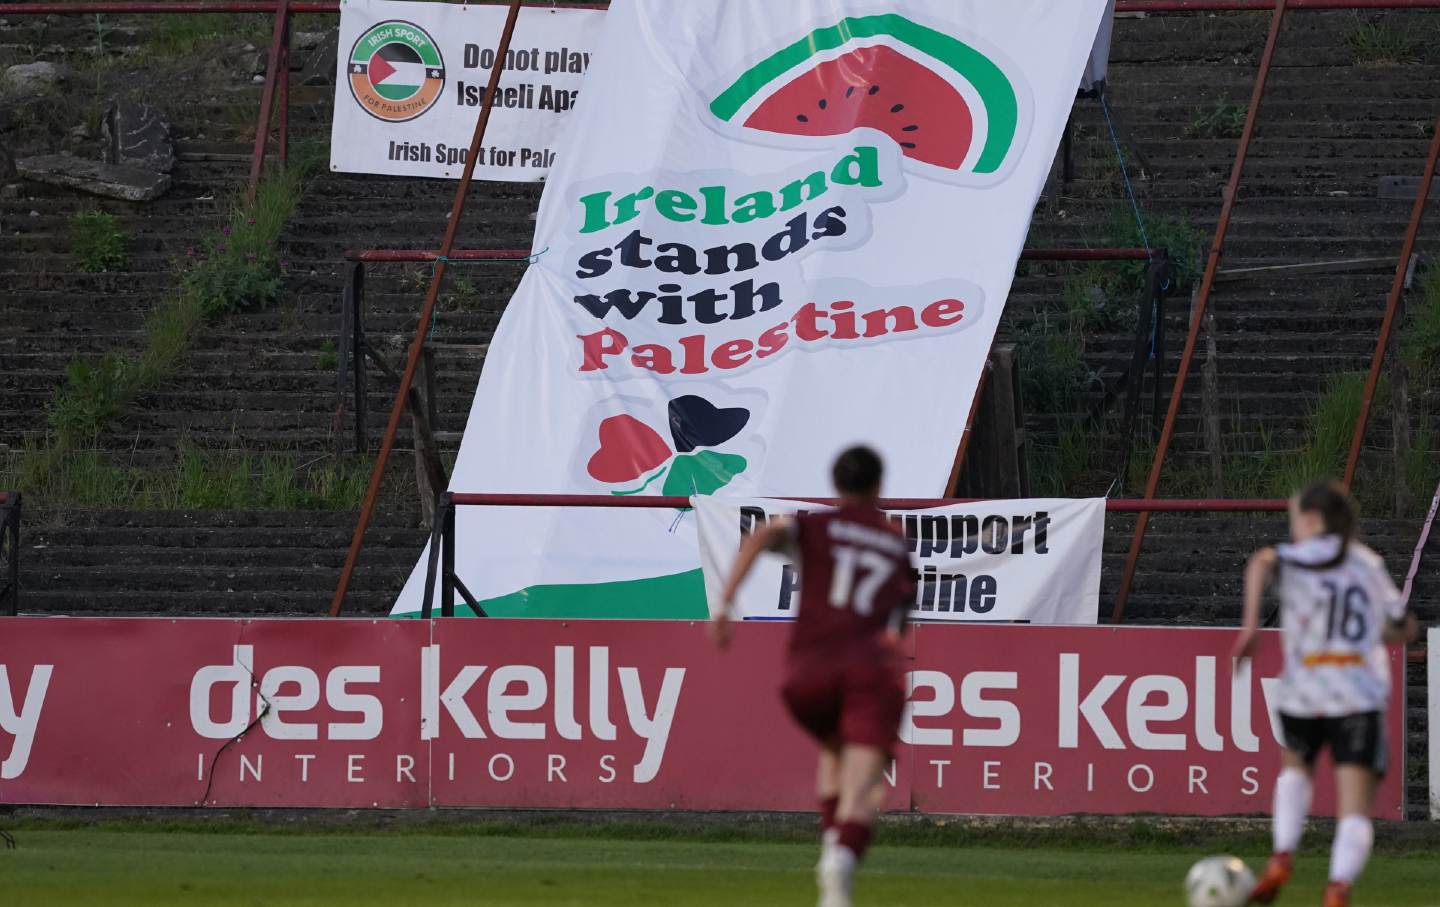 In Ireland, “Nothing but Love” for the Palestinian Women’s Soccer Team